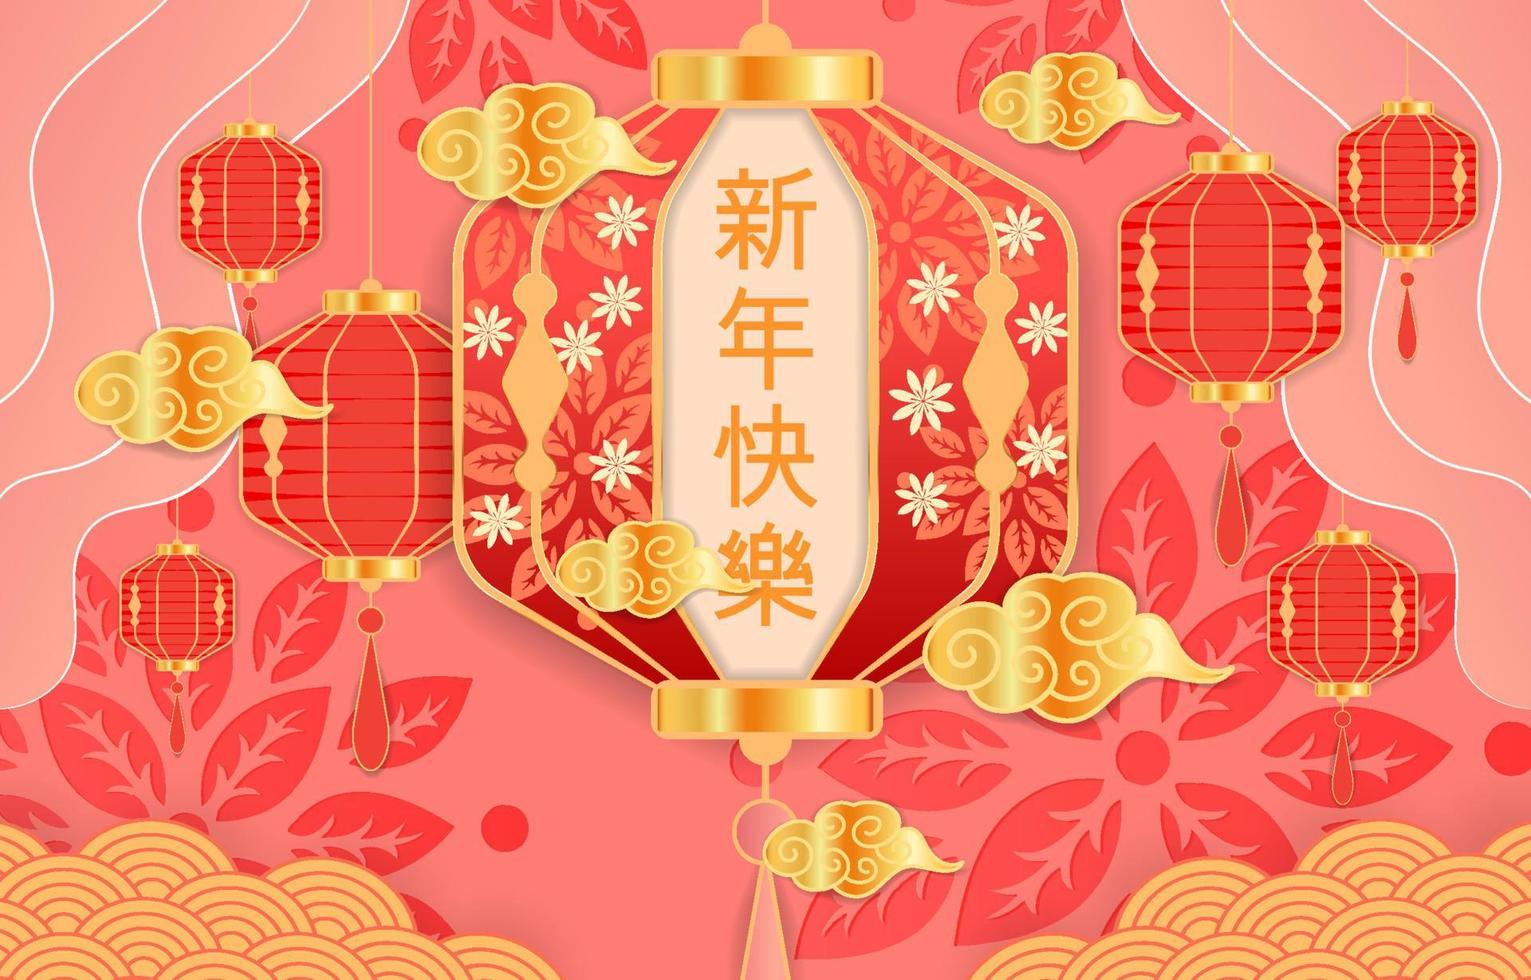 Chinese New Year Lantern Background vector